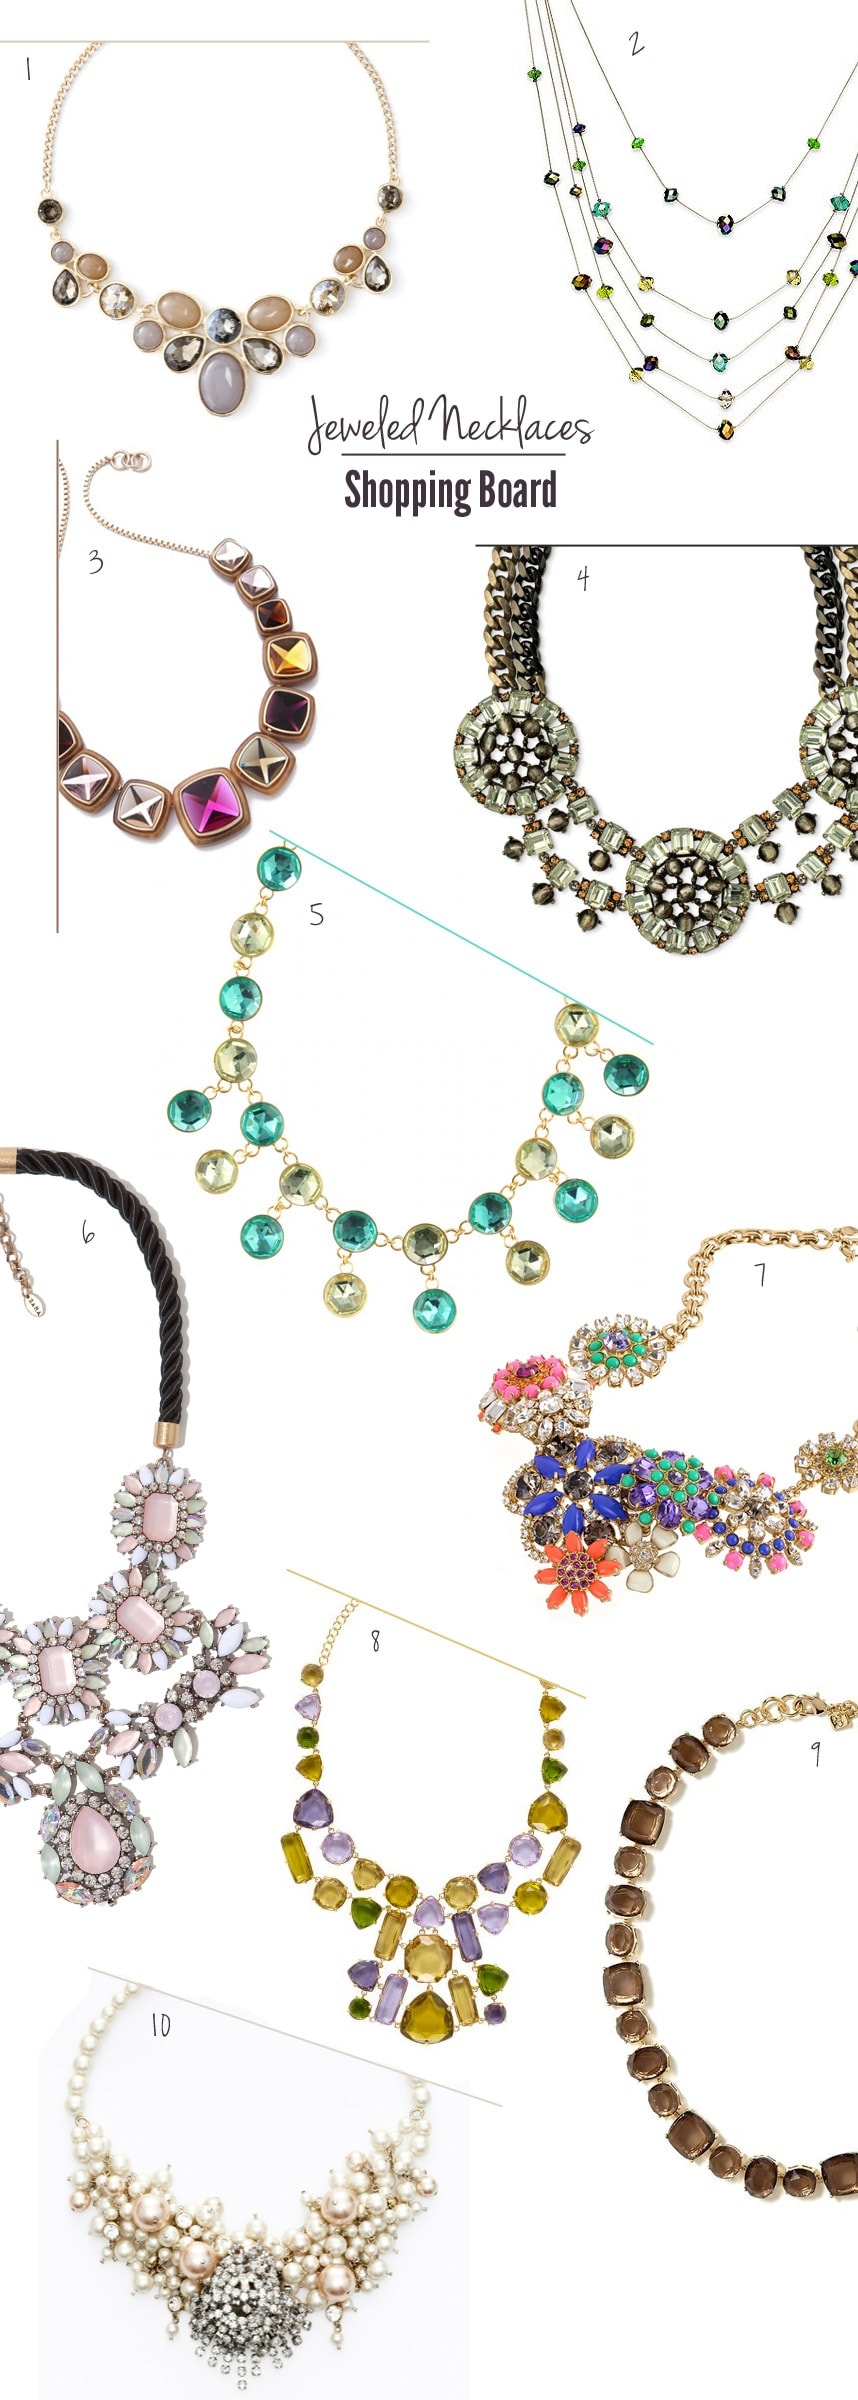 10 Jeweled Necklaces to Make a Statement